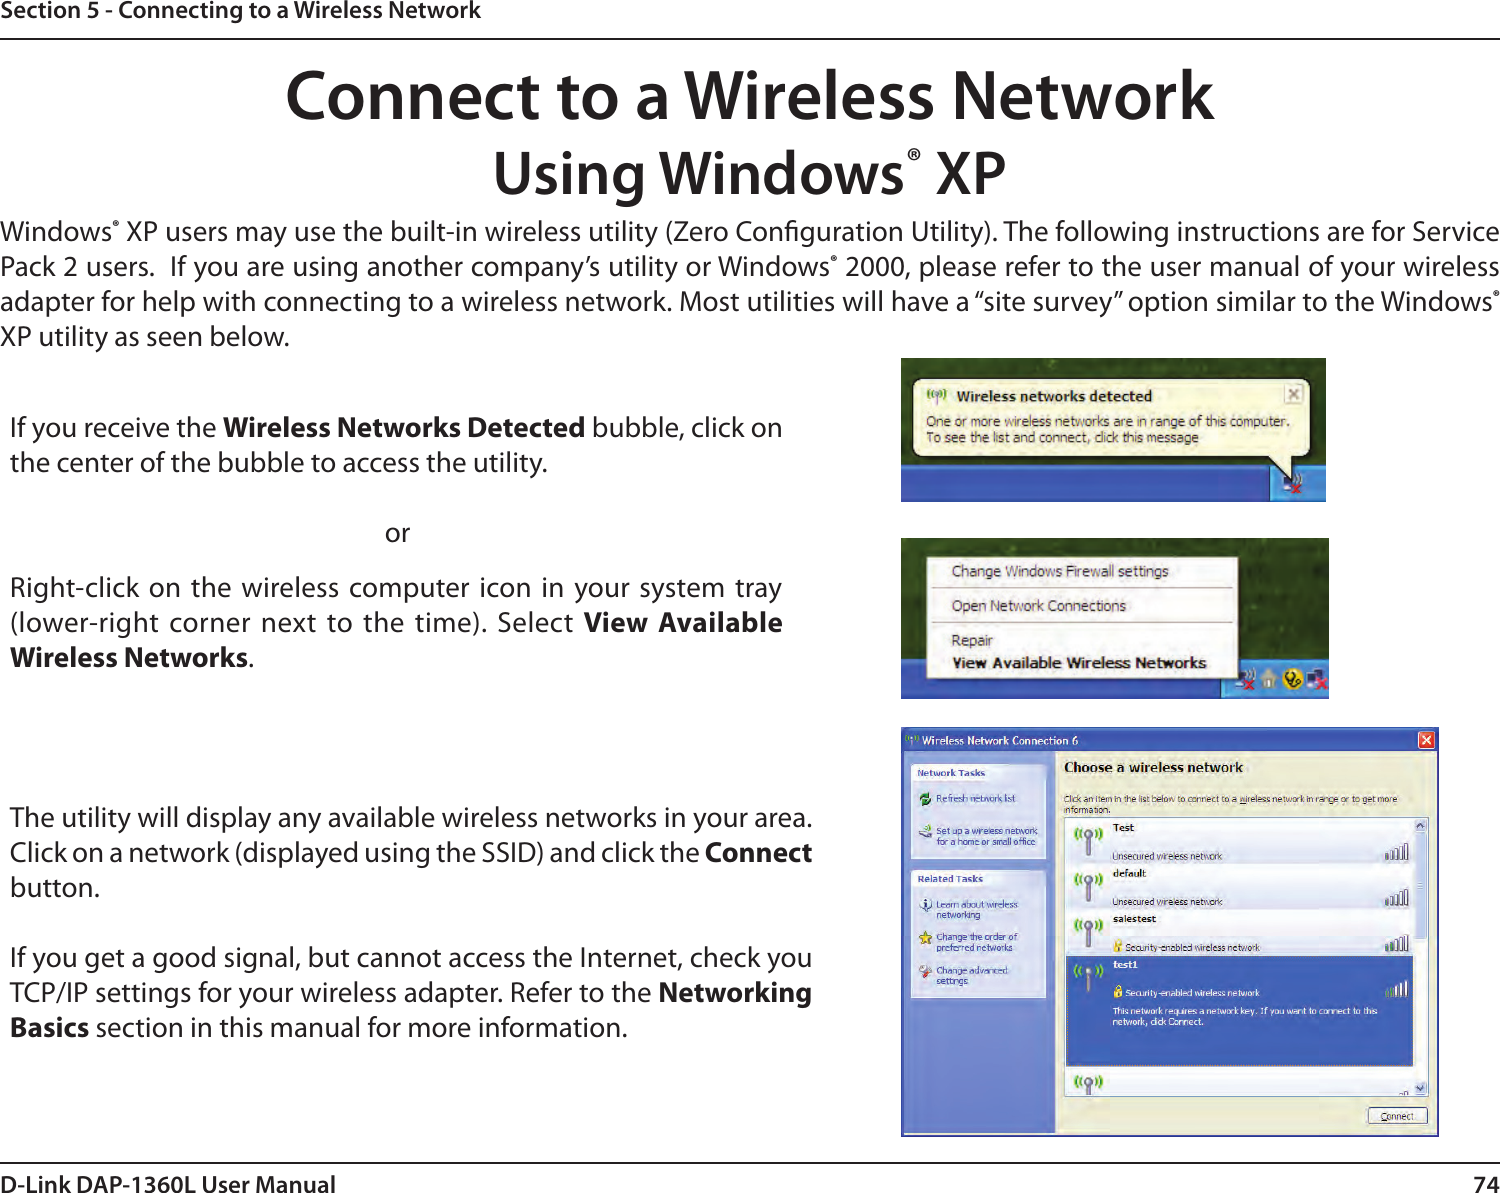 74D-Link DAP-1360L User ManualSection 5 - Connecting to a Wireless NetworkConnect to a Wireless NetworkUsing Windows® XPWindows® XP users may use the built-in wireless utility (Zero Conguration Utility). The following instructions are for Service Pack 2 users.  If you are using another company’s utility or Windows® 2000, please refer to the user manual of your wireless adapter for help with connecting to a wireless network. Most utilities will have a “site survey” option similar to the Windows® XP utility as seen below.Right-click on the wireless computer  icon in  your  system tray (lower-right  corner  next  to  the  time). Select View Available Wireless Networks.If you receive the Wireless Networks Detected bubble, click on the center of the bubble to access the utility.          orThe utility will display any available wireless networks in your area. Click on a network (displayed using the SSID) and click the Connect button.If you get a good signal, but cannot access the Internet, check you TCP/IP settings for your wireless adapter. Refer to the Networking Basics section in this manual for more information.